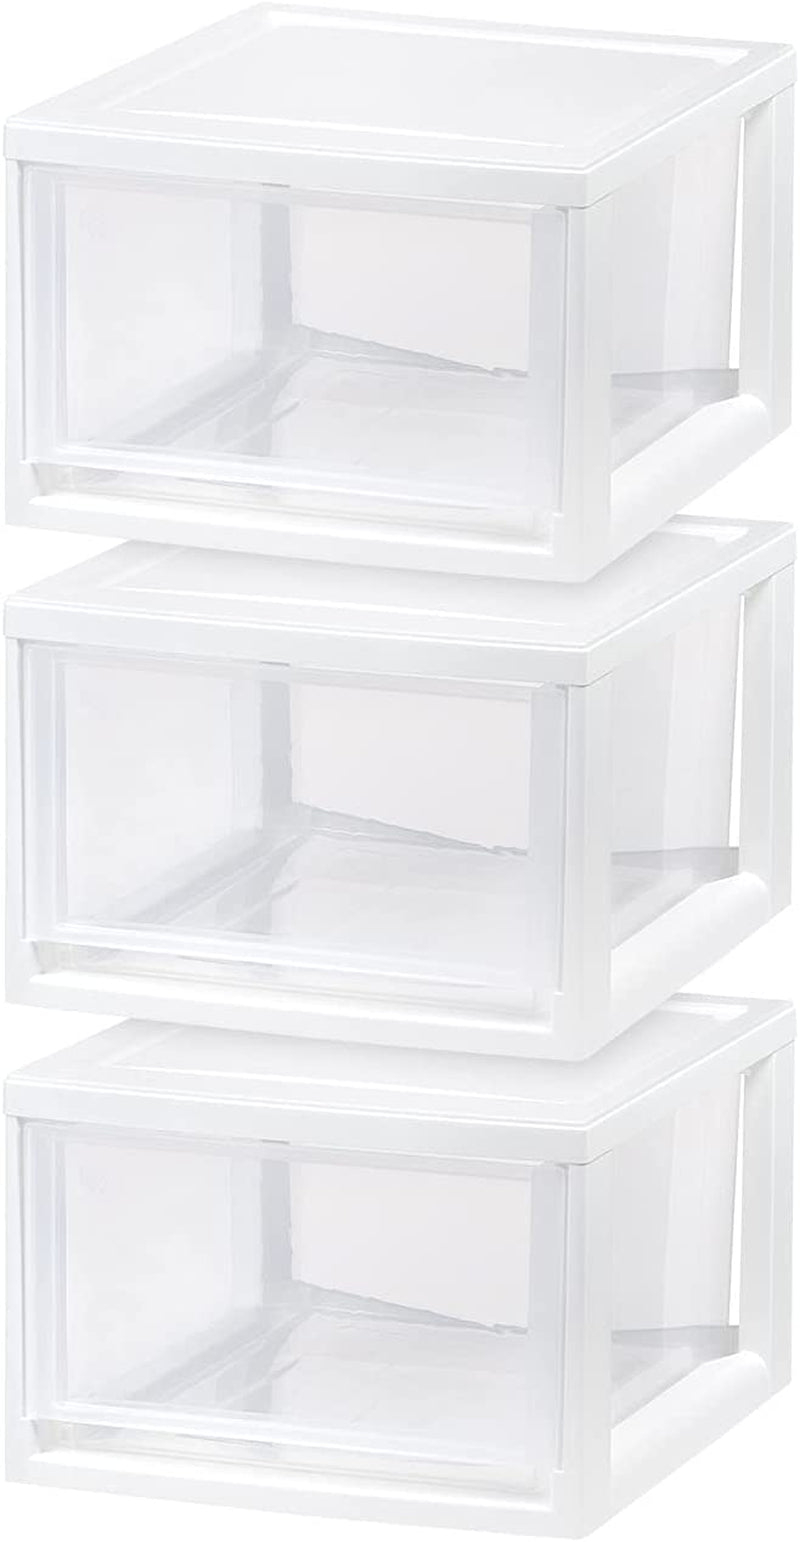 IRIS USA Stackable Storage Drawer, Plastic Drawer Organizer with Clear Doors for Pantry, Bedroom, Closet, Desk, Kitchen, Home and Office De-Clutter, Store Under-Sink, Shoes and Crafts - Black, 2 Pack Home & Garden > Household Supplies > Storage & Organization IRIS USA, Inc. White Drawer 14.5 Qt. -3 Pack